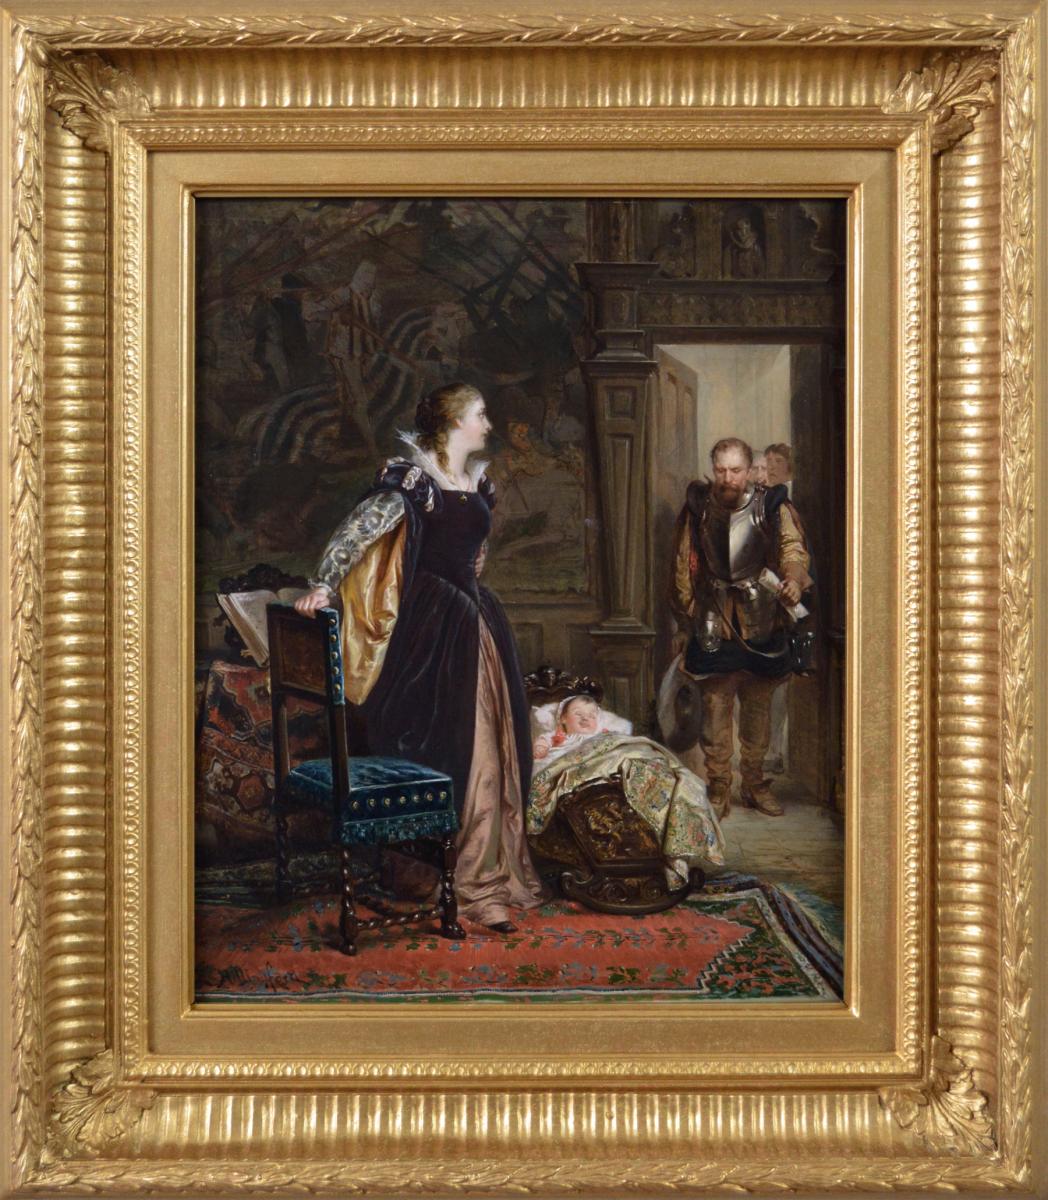 Historical genre oil painting of Mary Queen of Scots & the infant James I by Robert Alexander Hillingford 